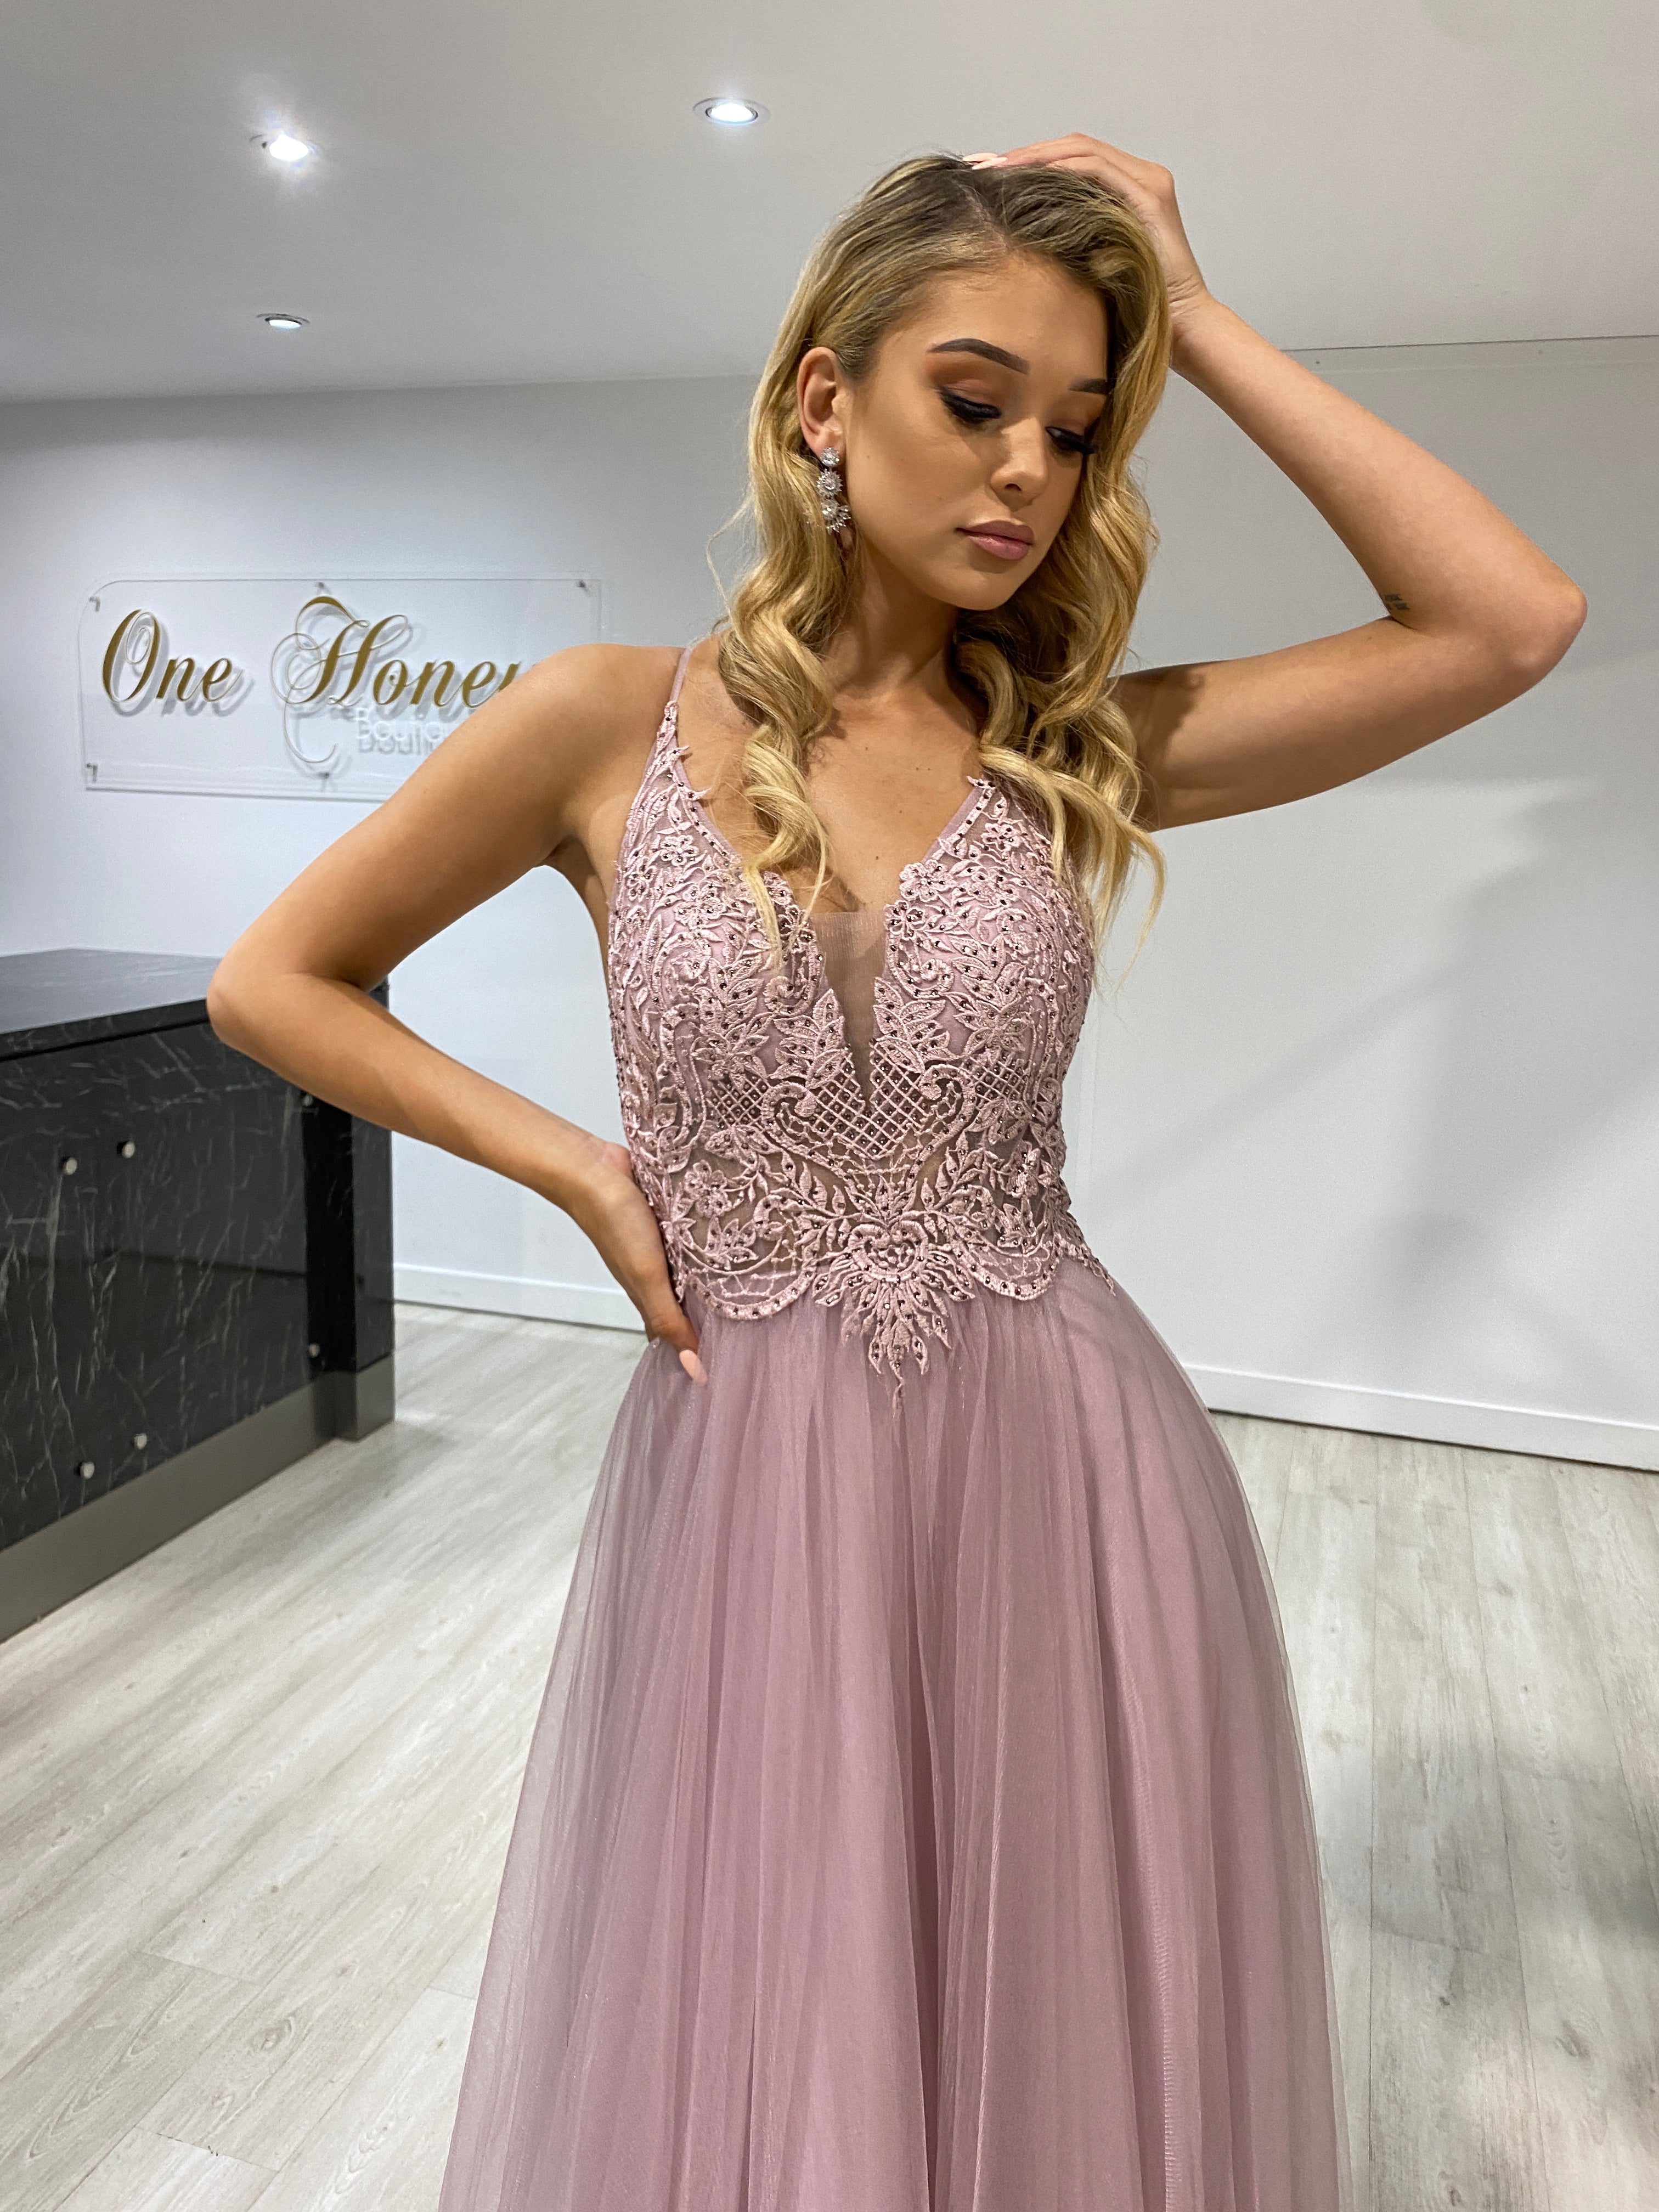 V-neck Blush Pink Tulle Handmade Flower Evening Dress with Long Sleeves  PM1277 | Prom dresses with sleeves, Prom dresses long with sleeves, Prom  dresses lace